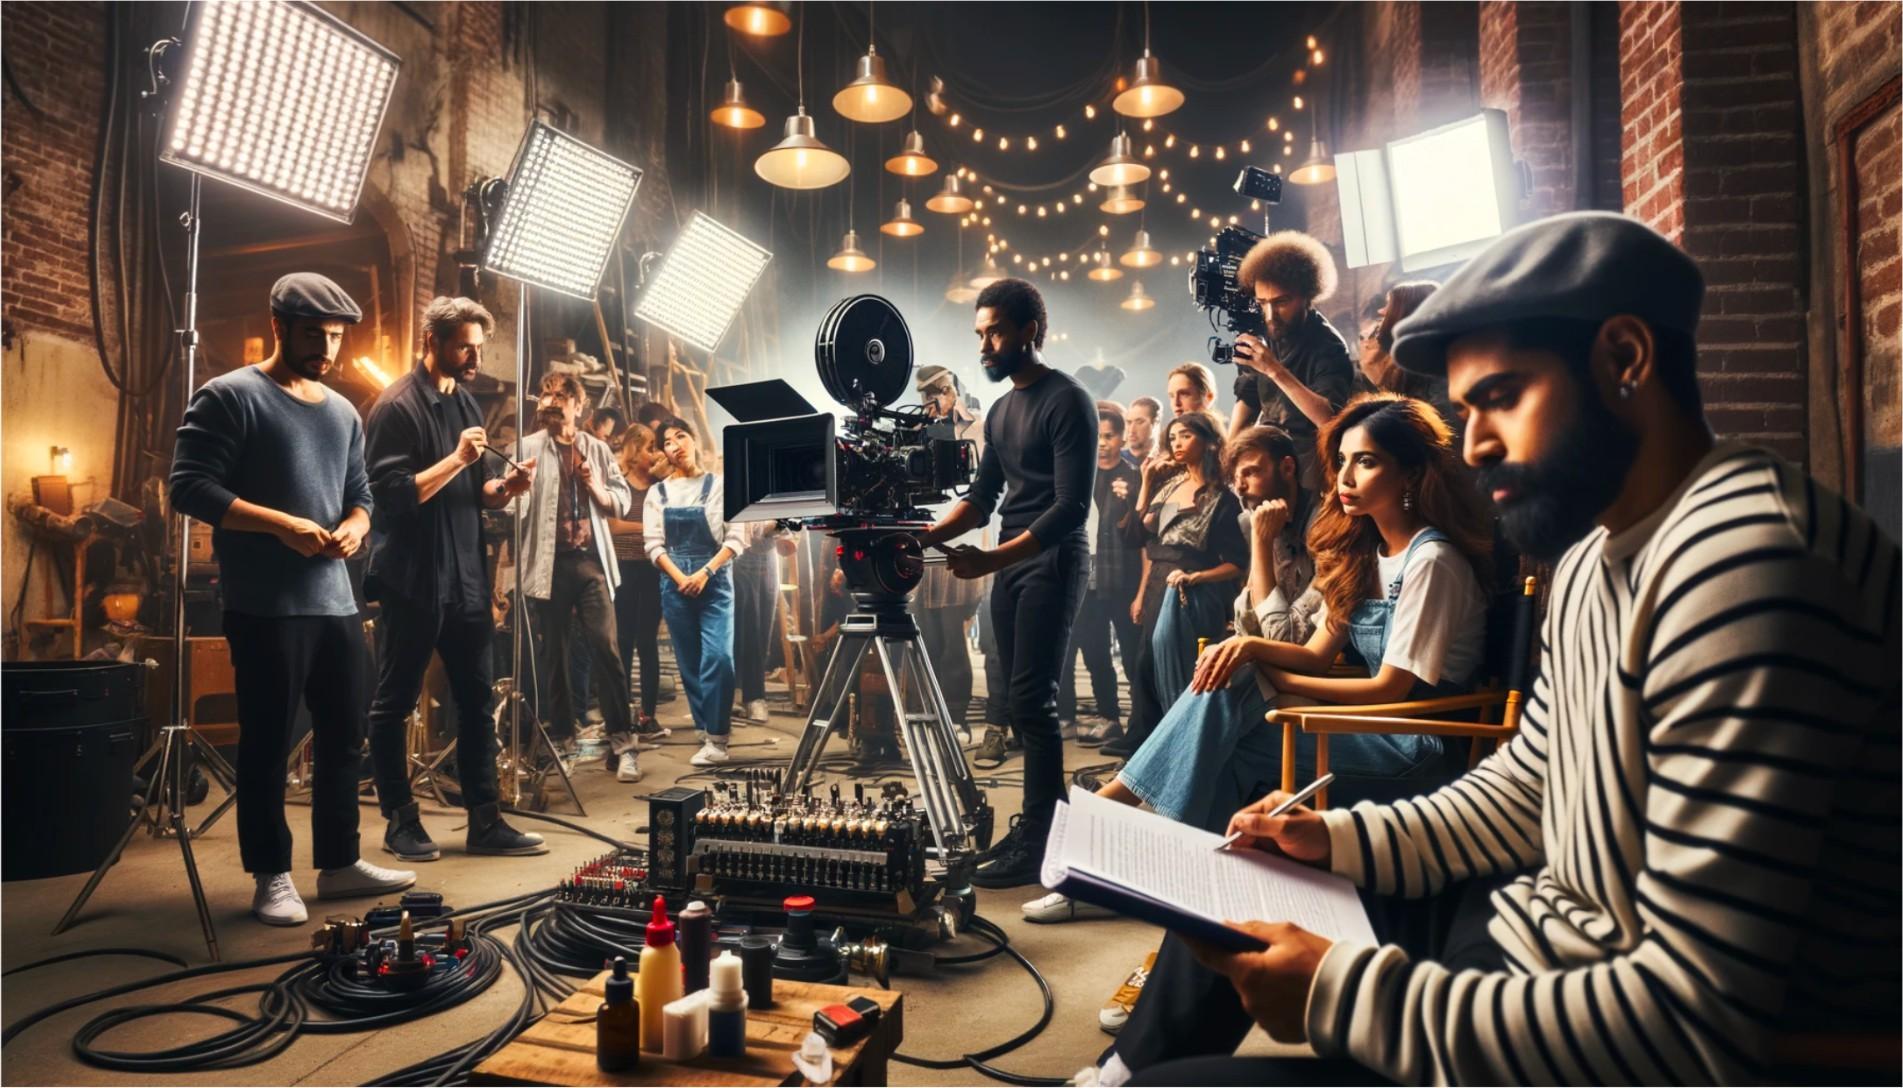 Image generated by DALL-E 3 showing a movie set with a director behind a large movie camera. The director is surrounded by a film crew and actors. 